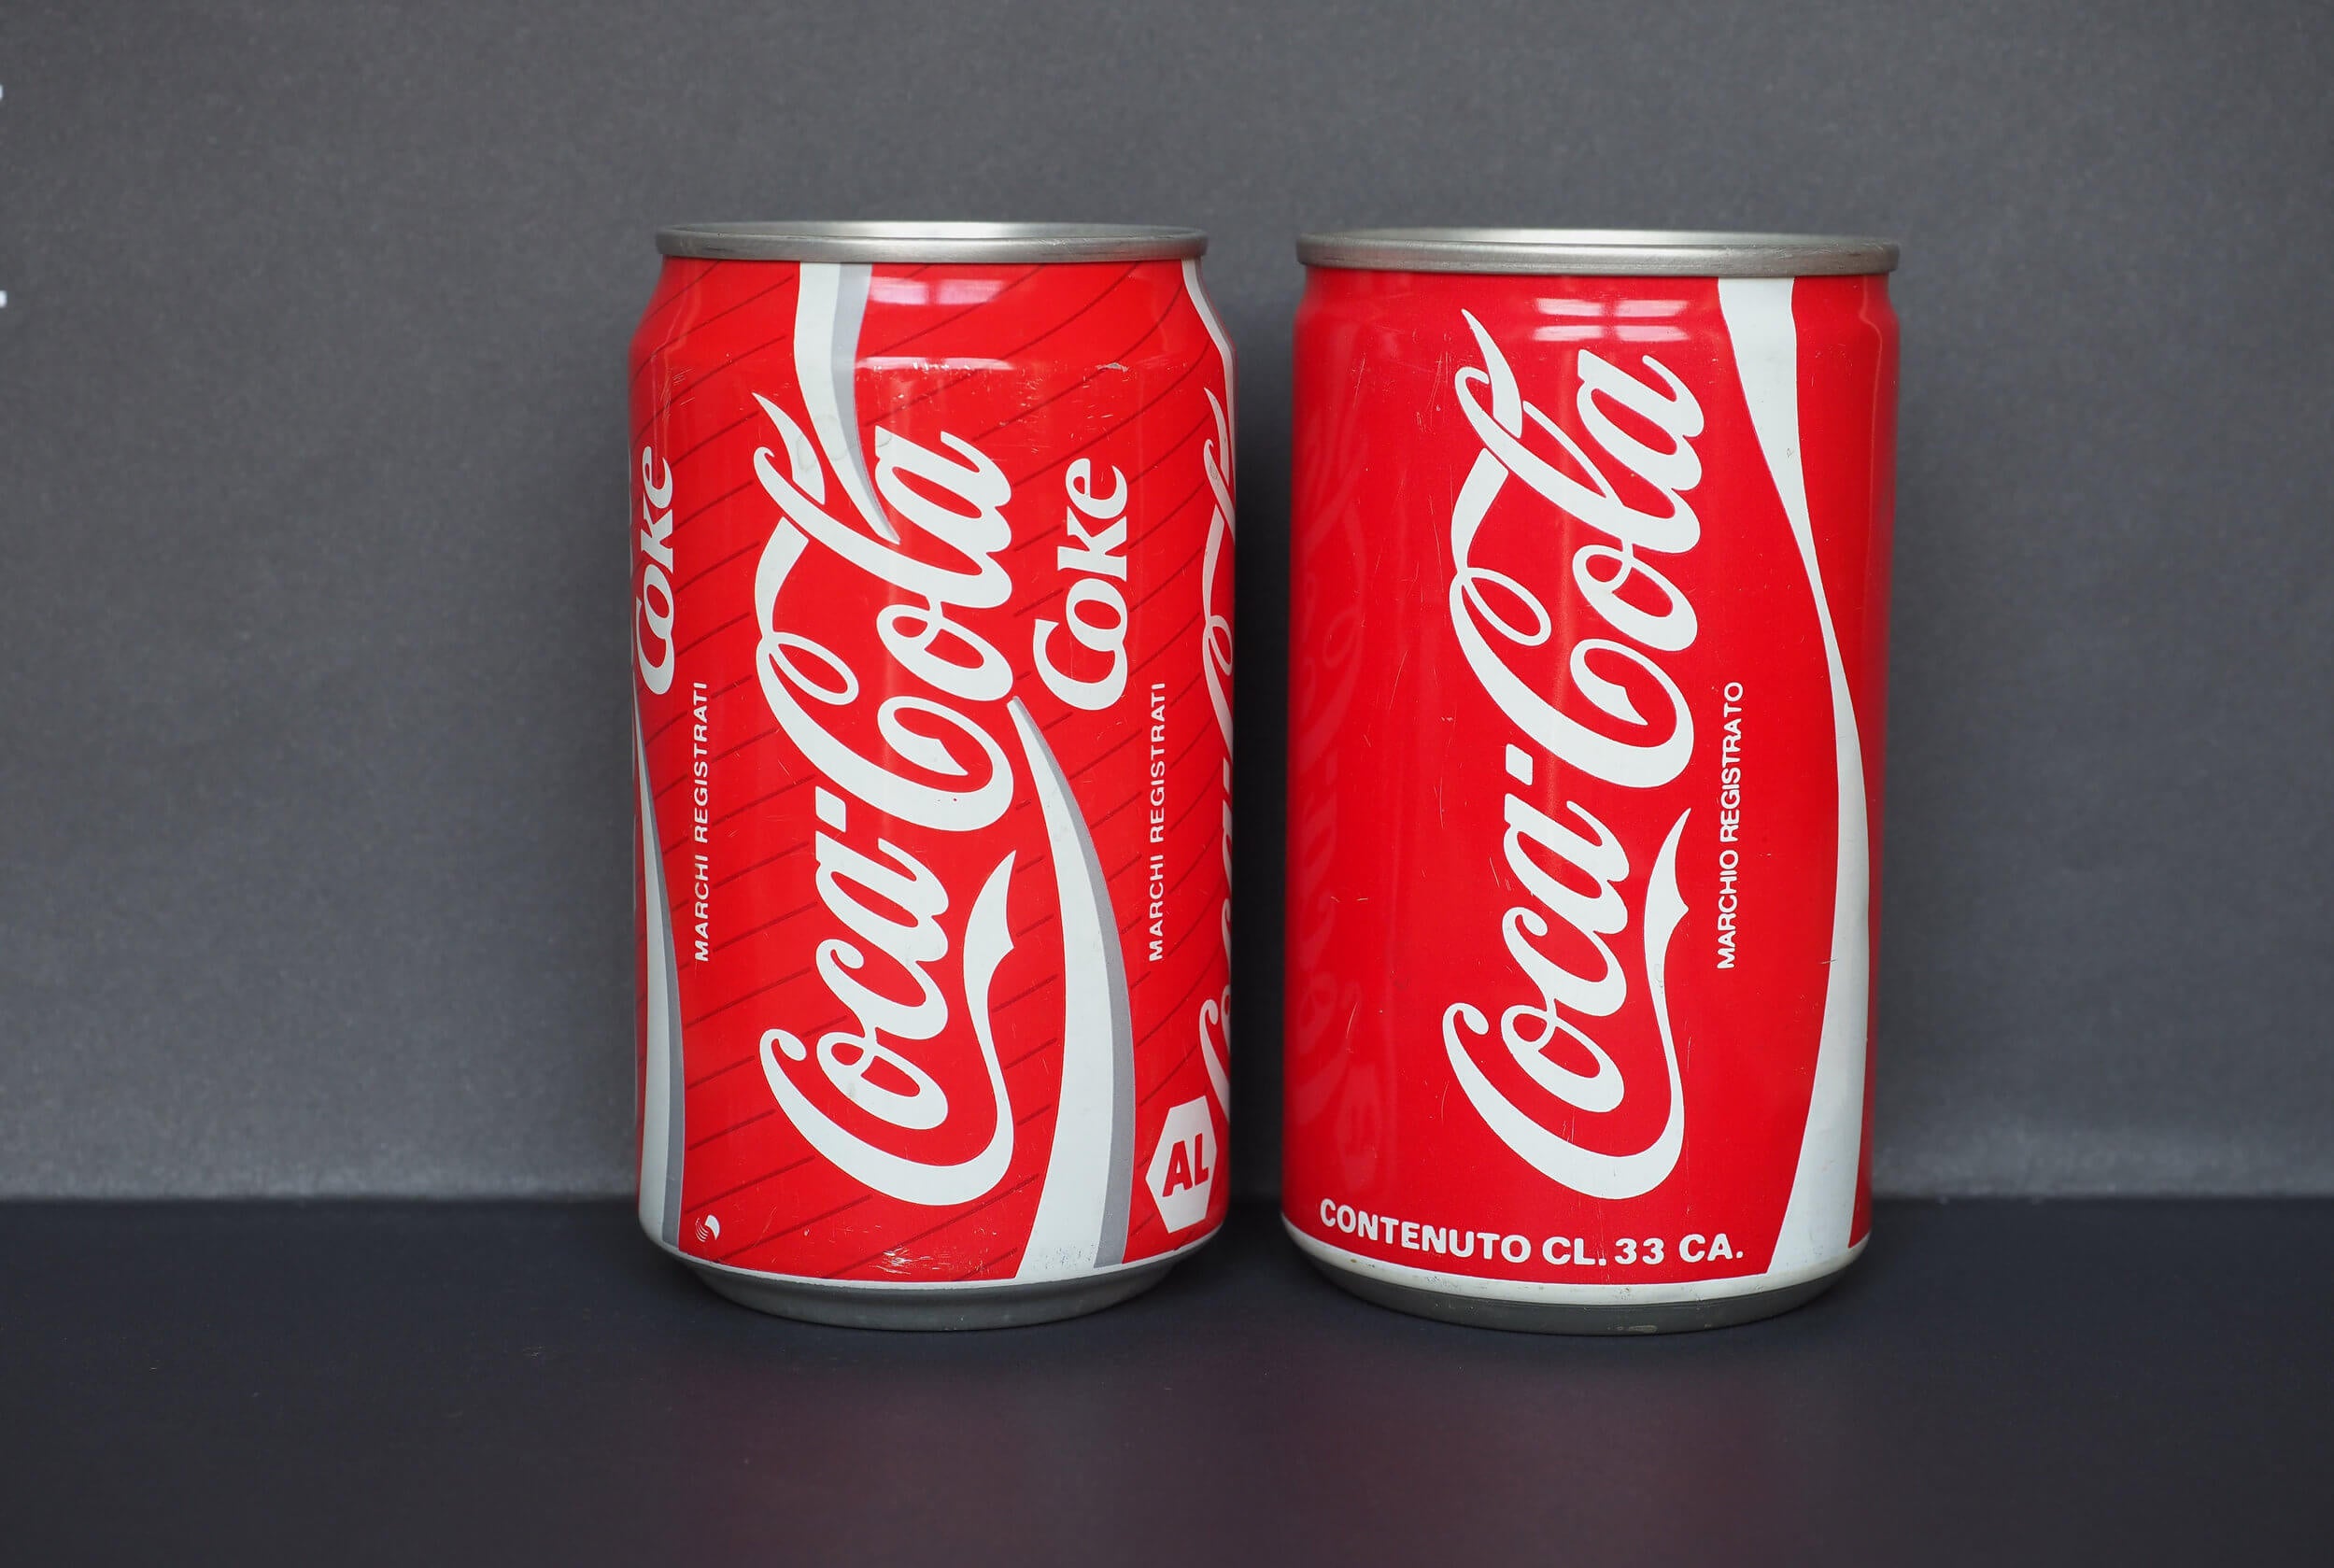 Two cans of Coke.